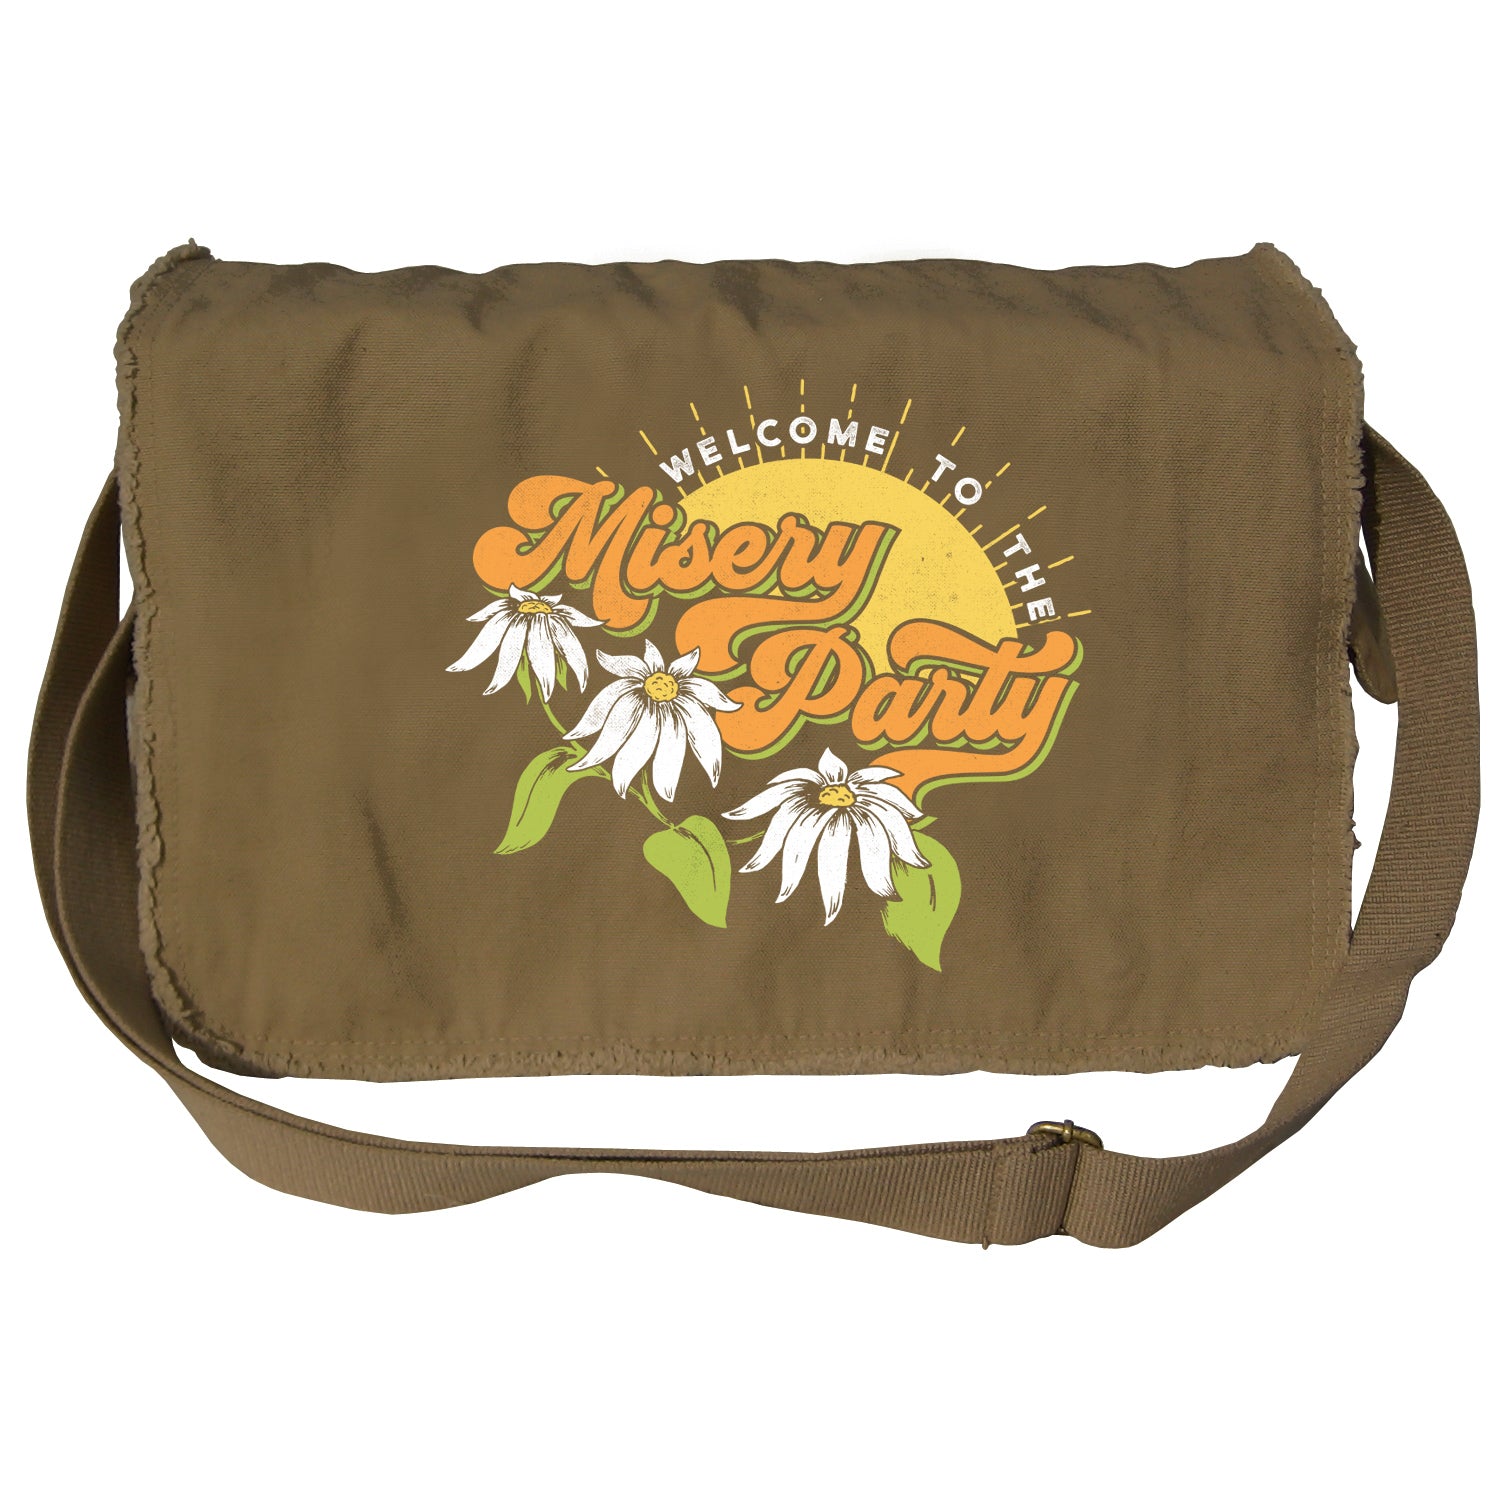 Welcome To The Misery Party Messenger Bag